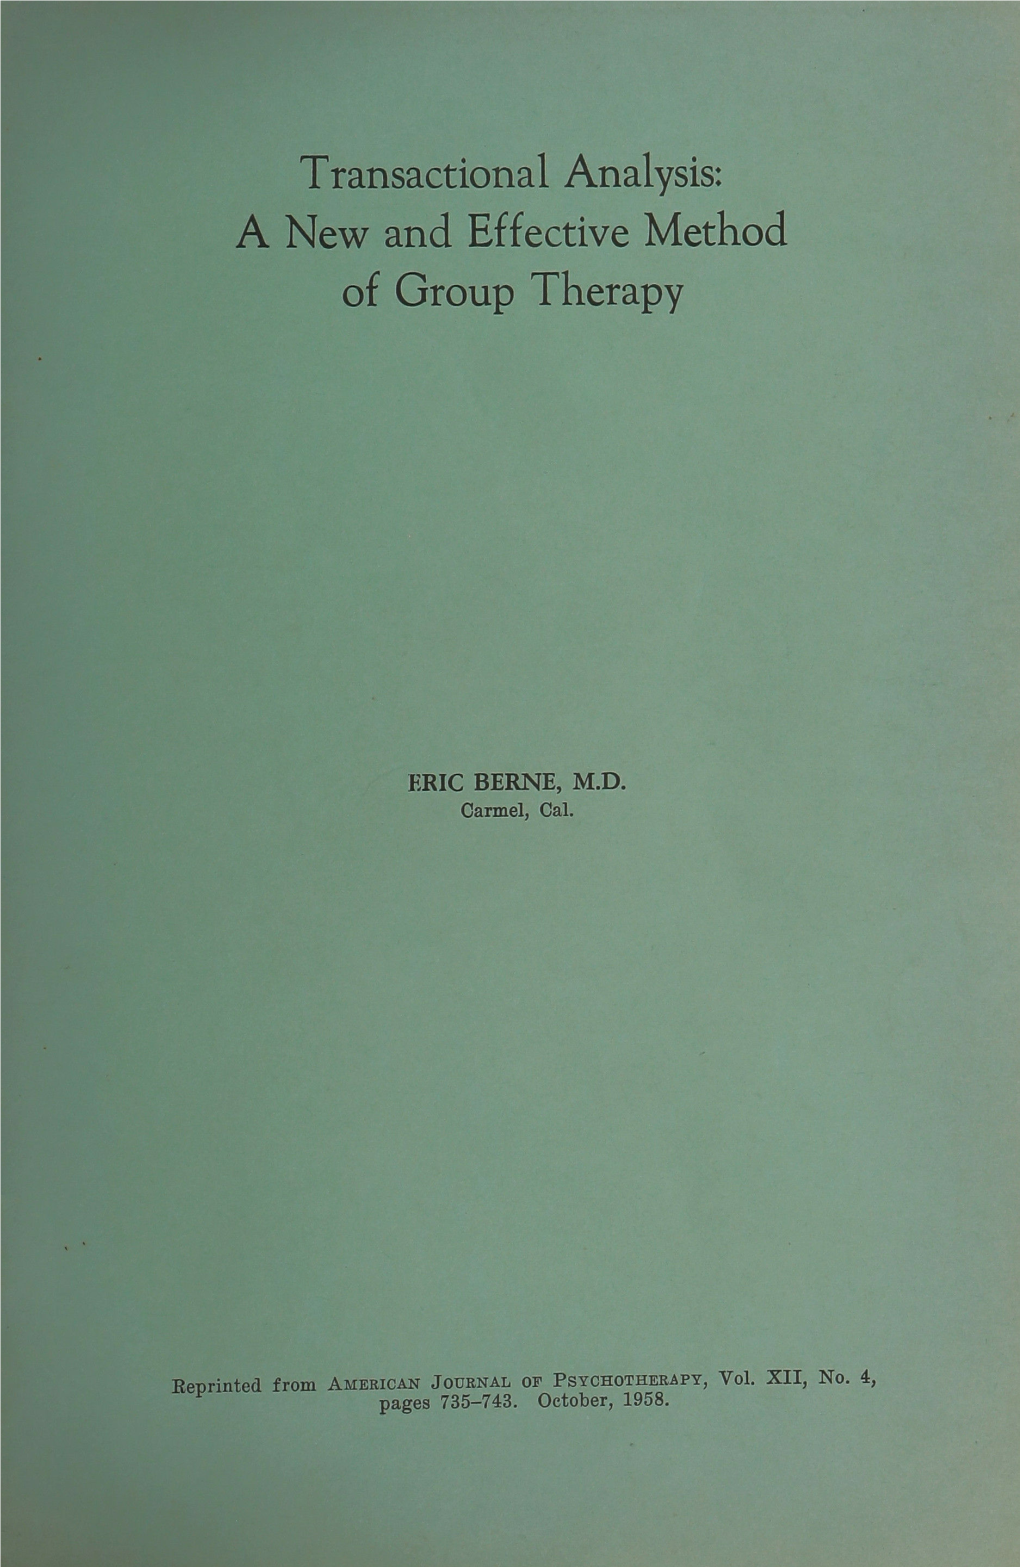 Transactional Analysis: a New and Effective Method of Group Therapy